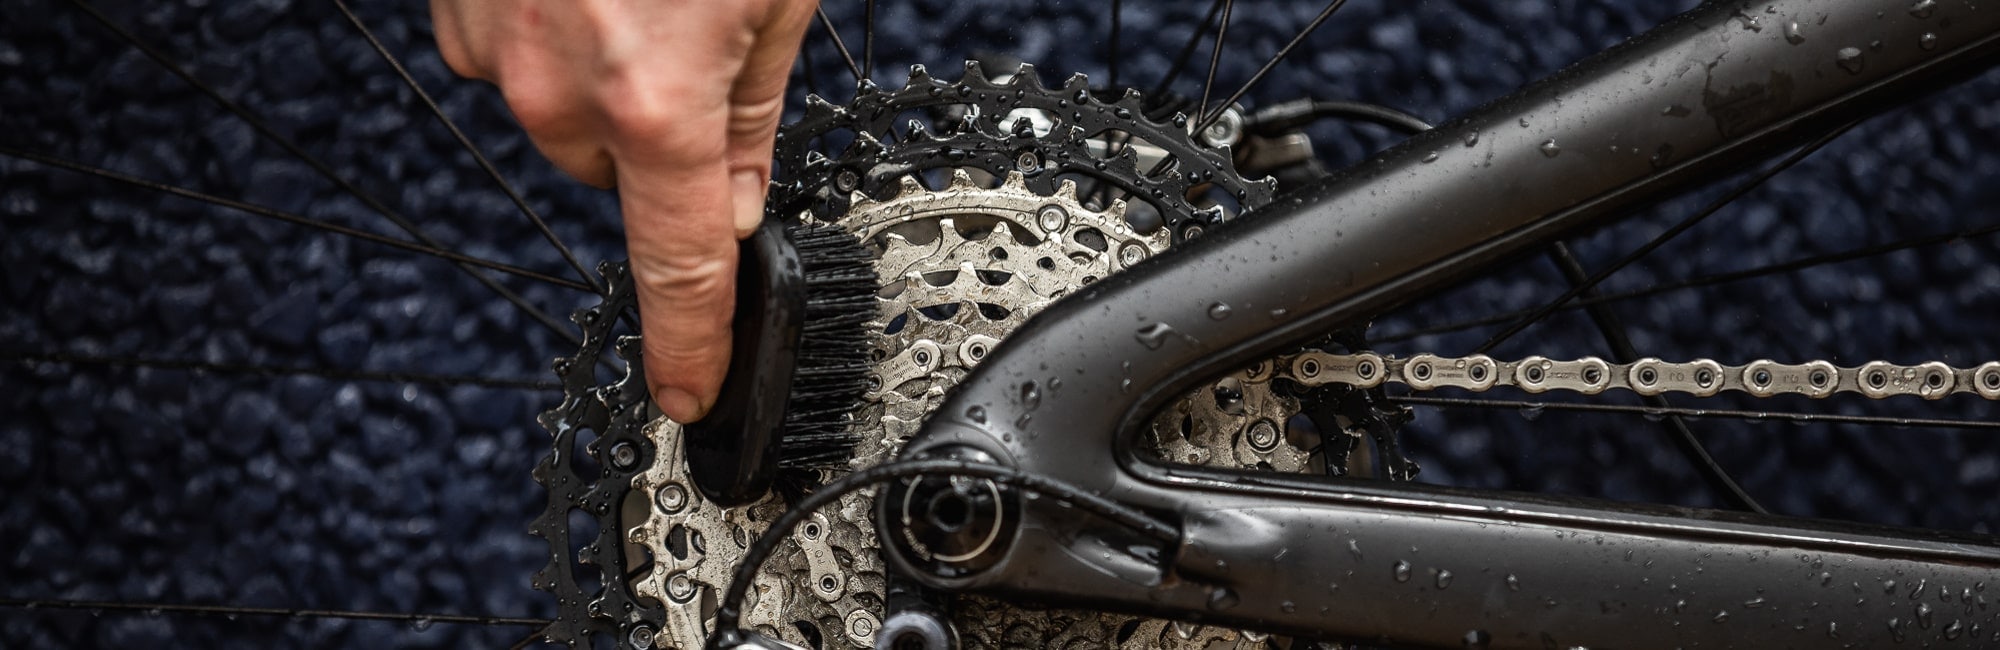 how-to-clean-your-bike-after-each-ride-hero-banner